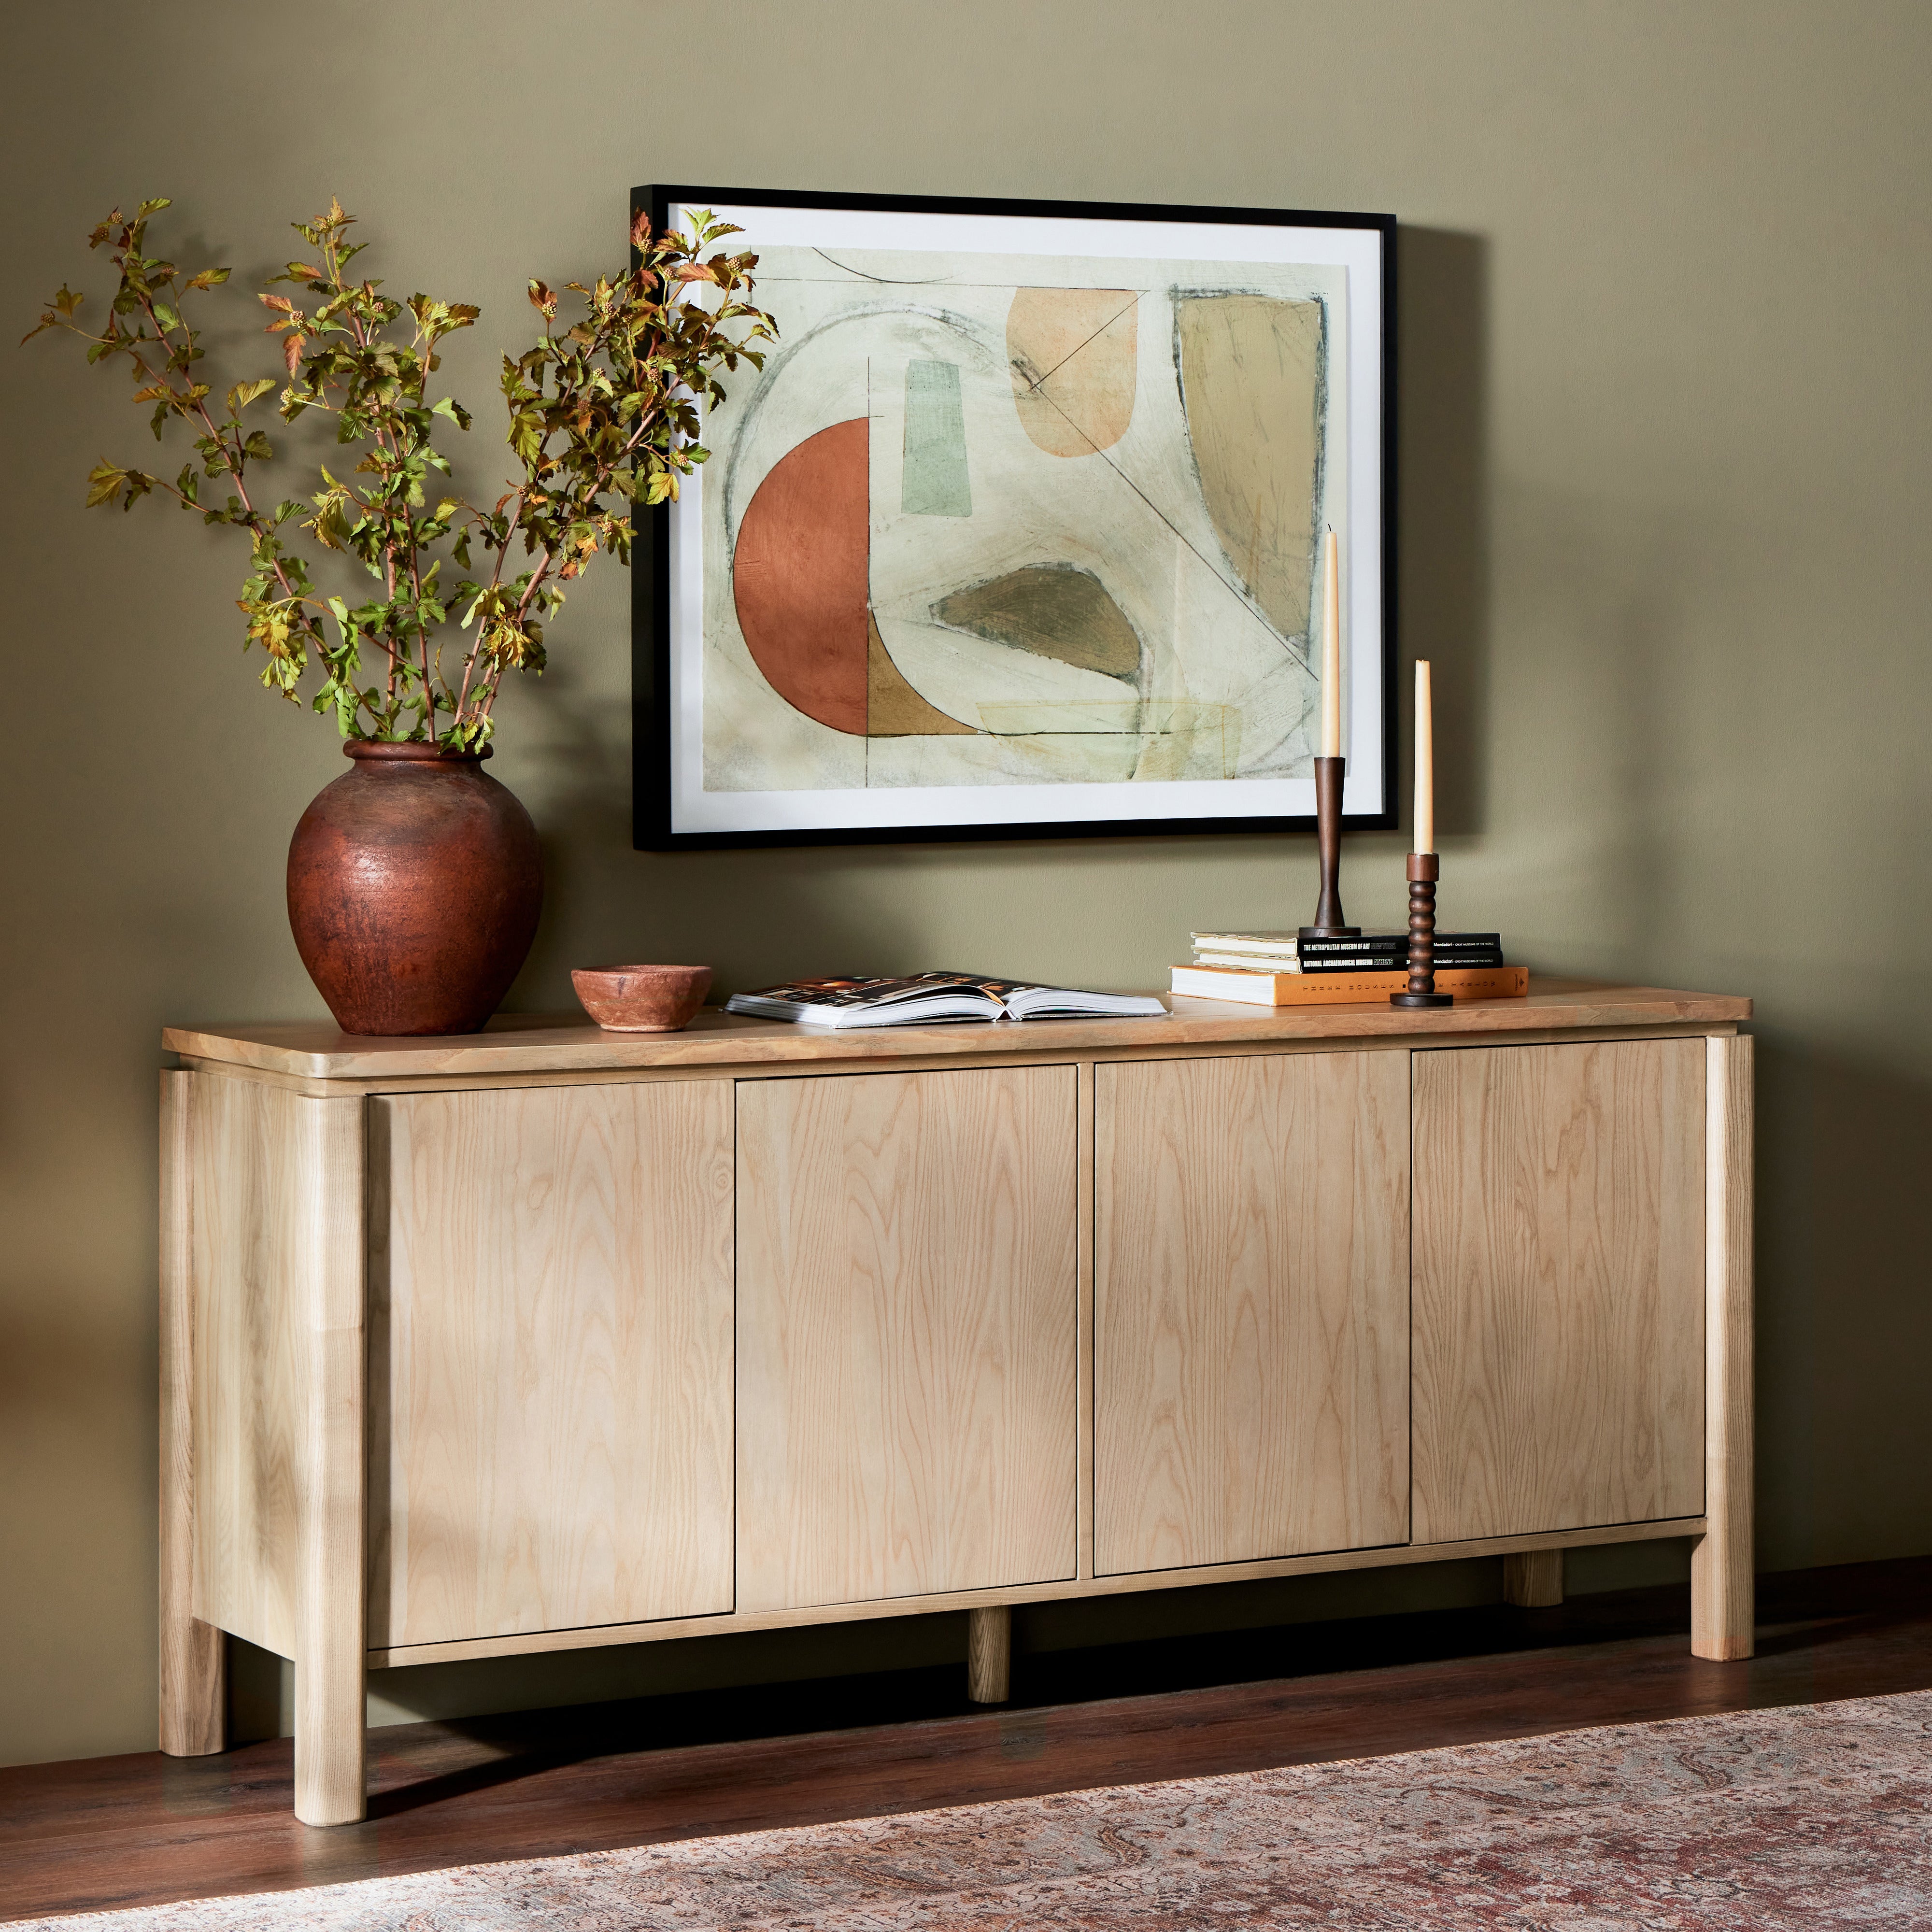 Large, rounded legs support this sleek sideboard with a reveal detail at the top. A beautiful ash finish showcases and highlights the natural wood grain. Amethyst Home provides interior design, new construction, custom furniture, and area rugs in the Winter Garden metro area.